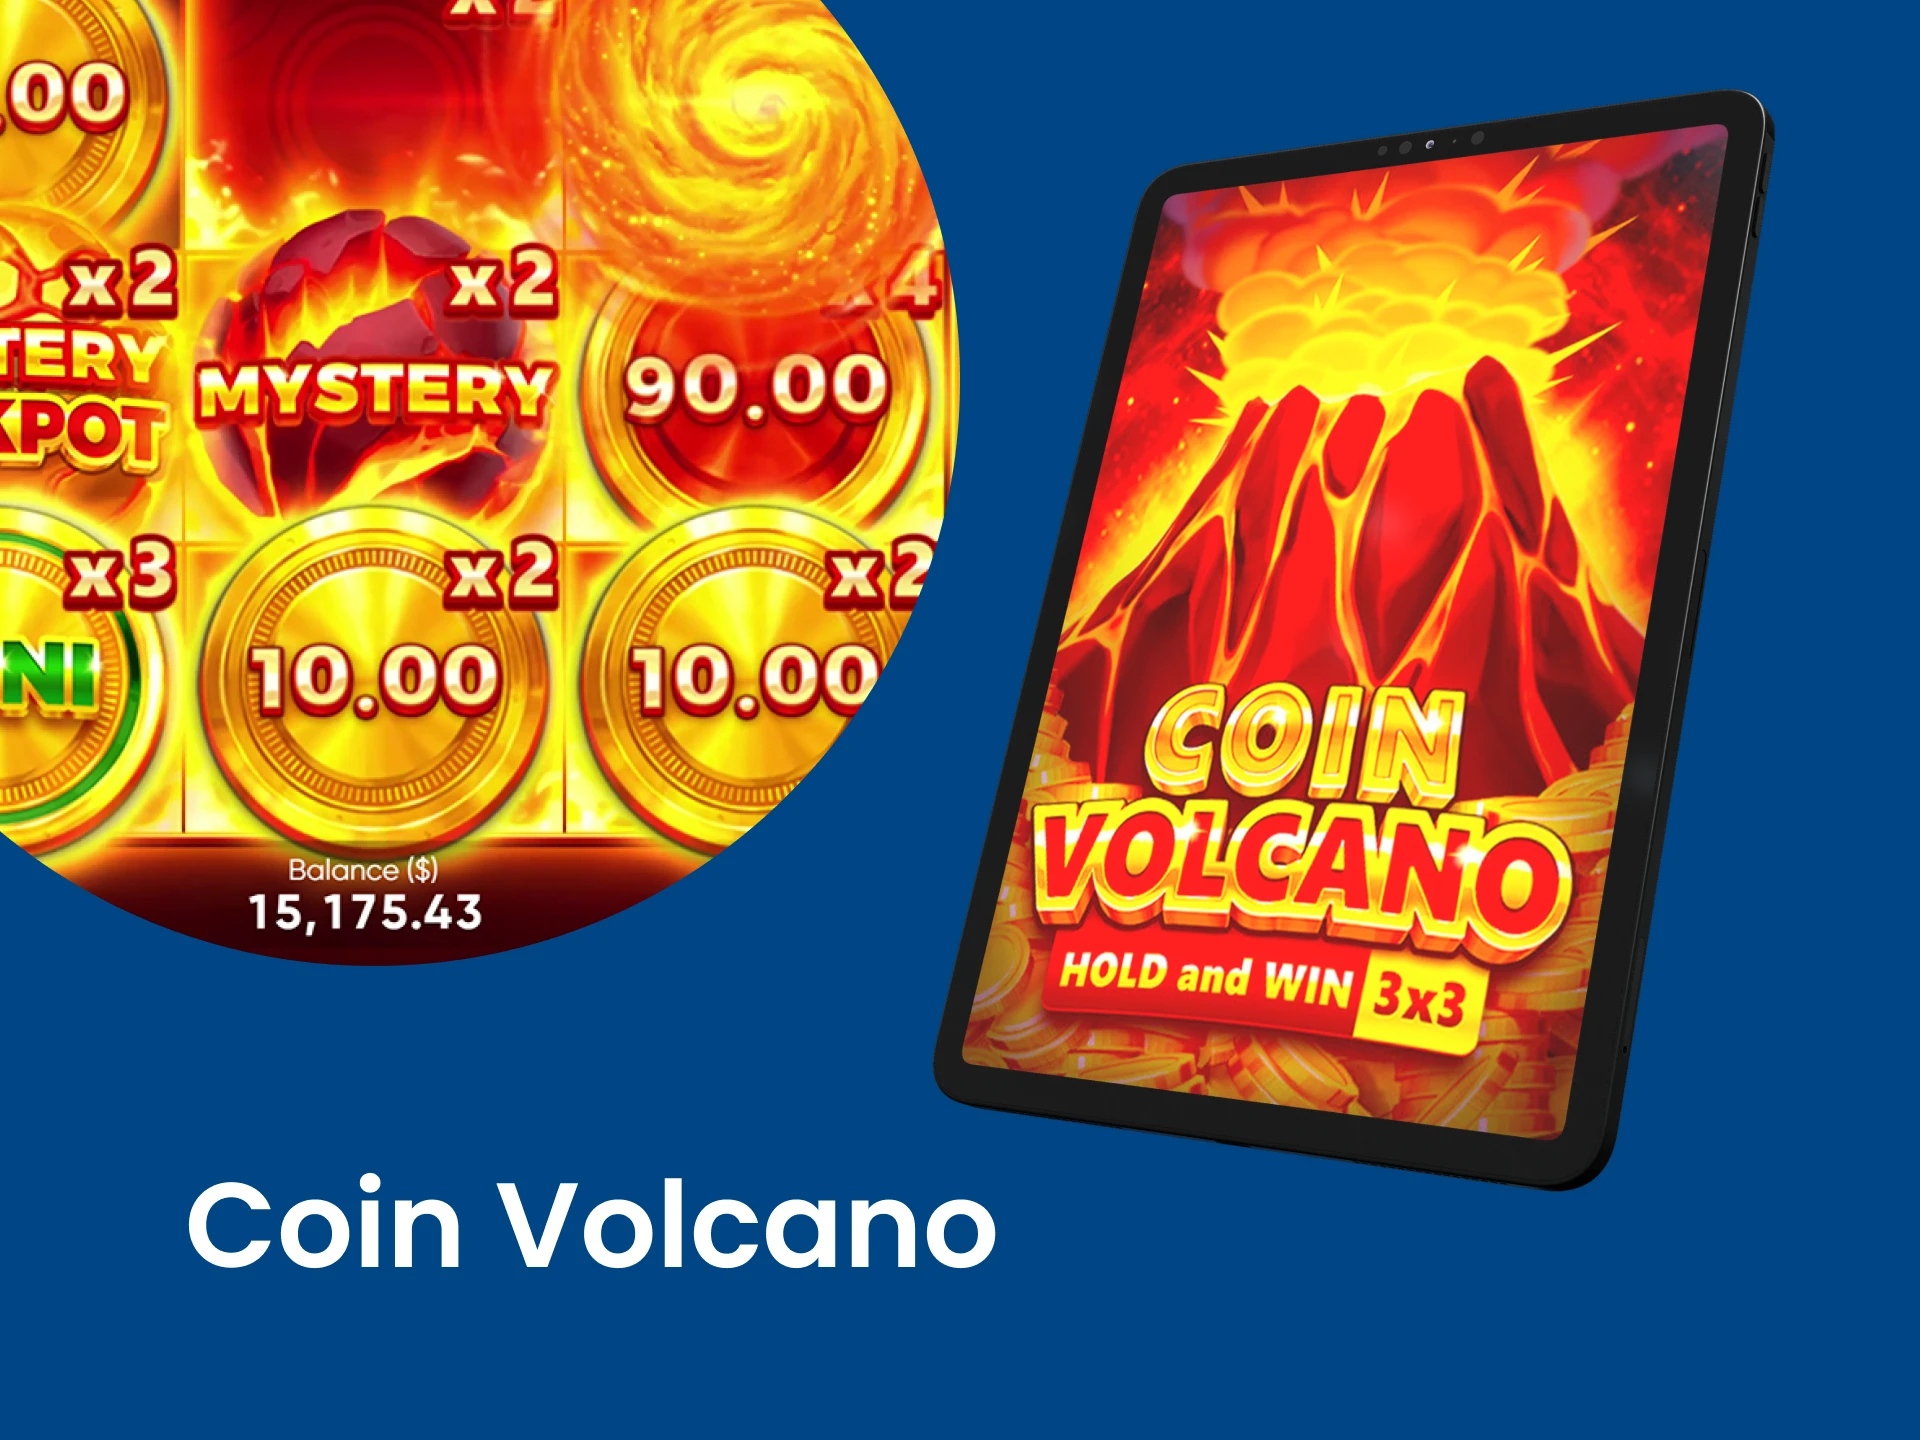 For gaming on your iPad, choose Coin Volcano.